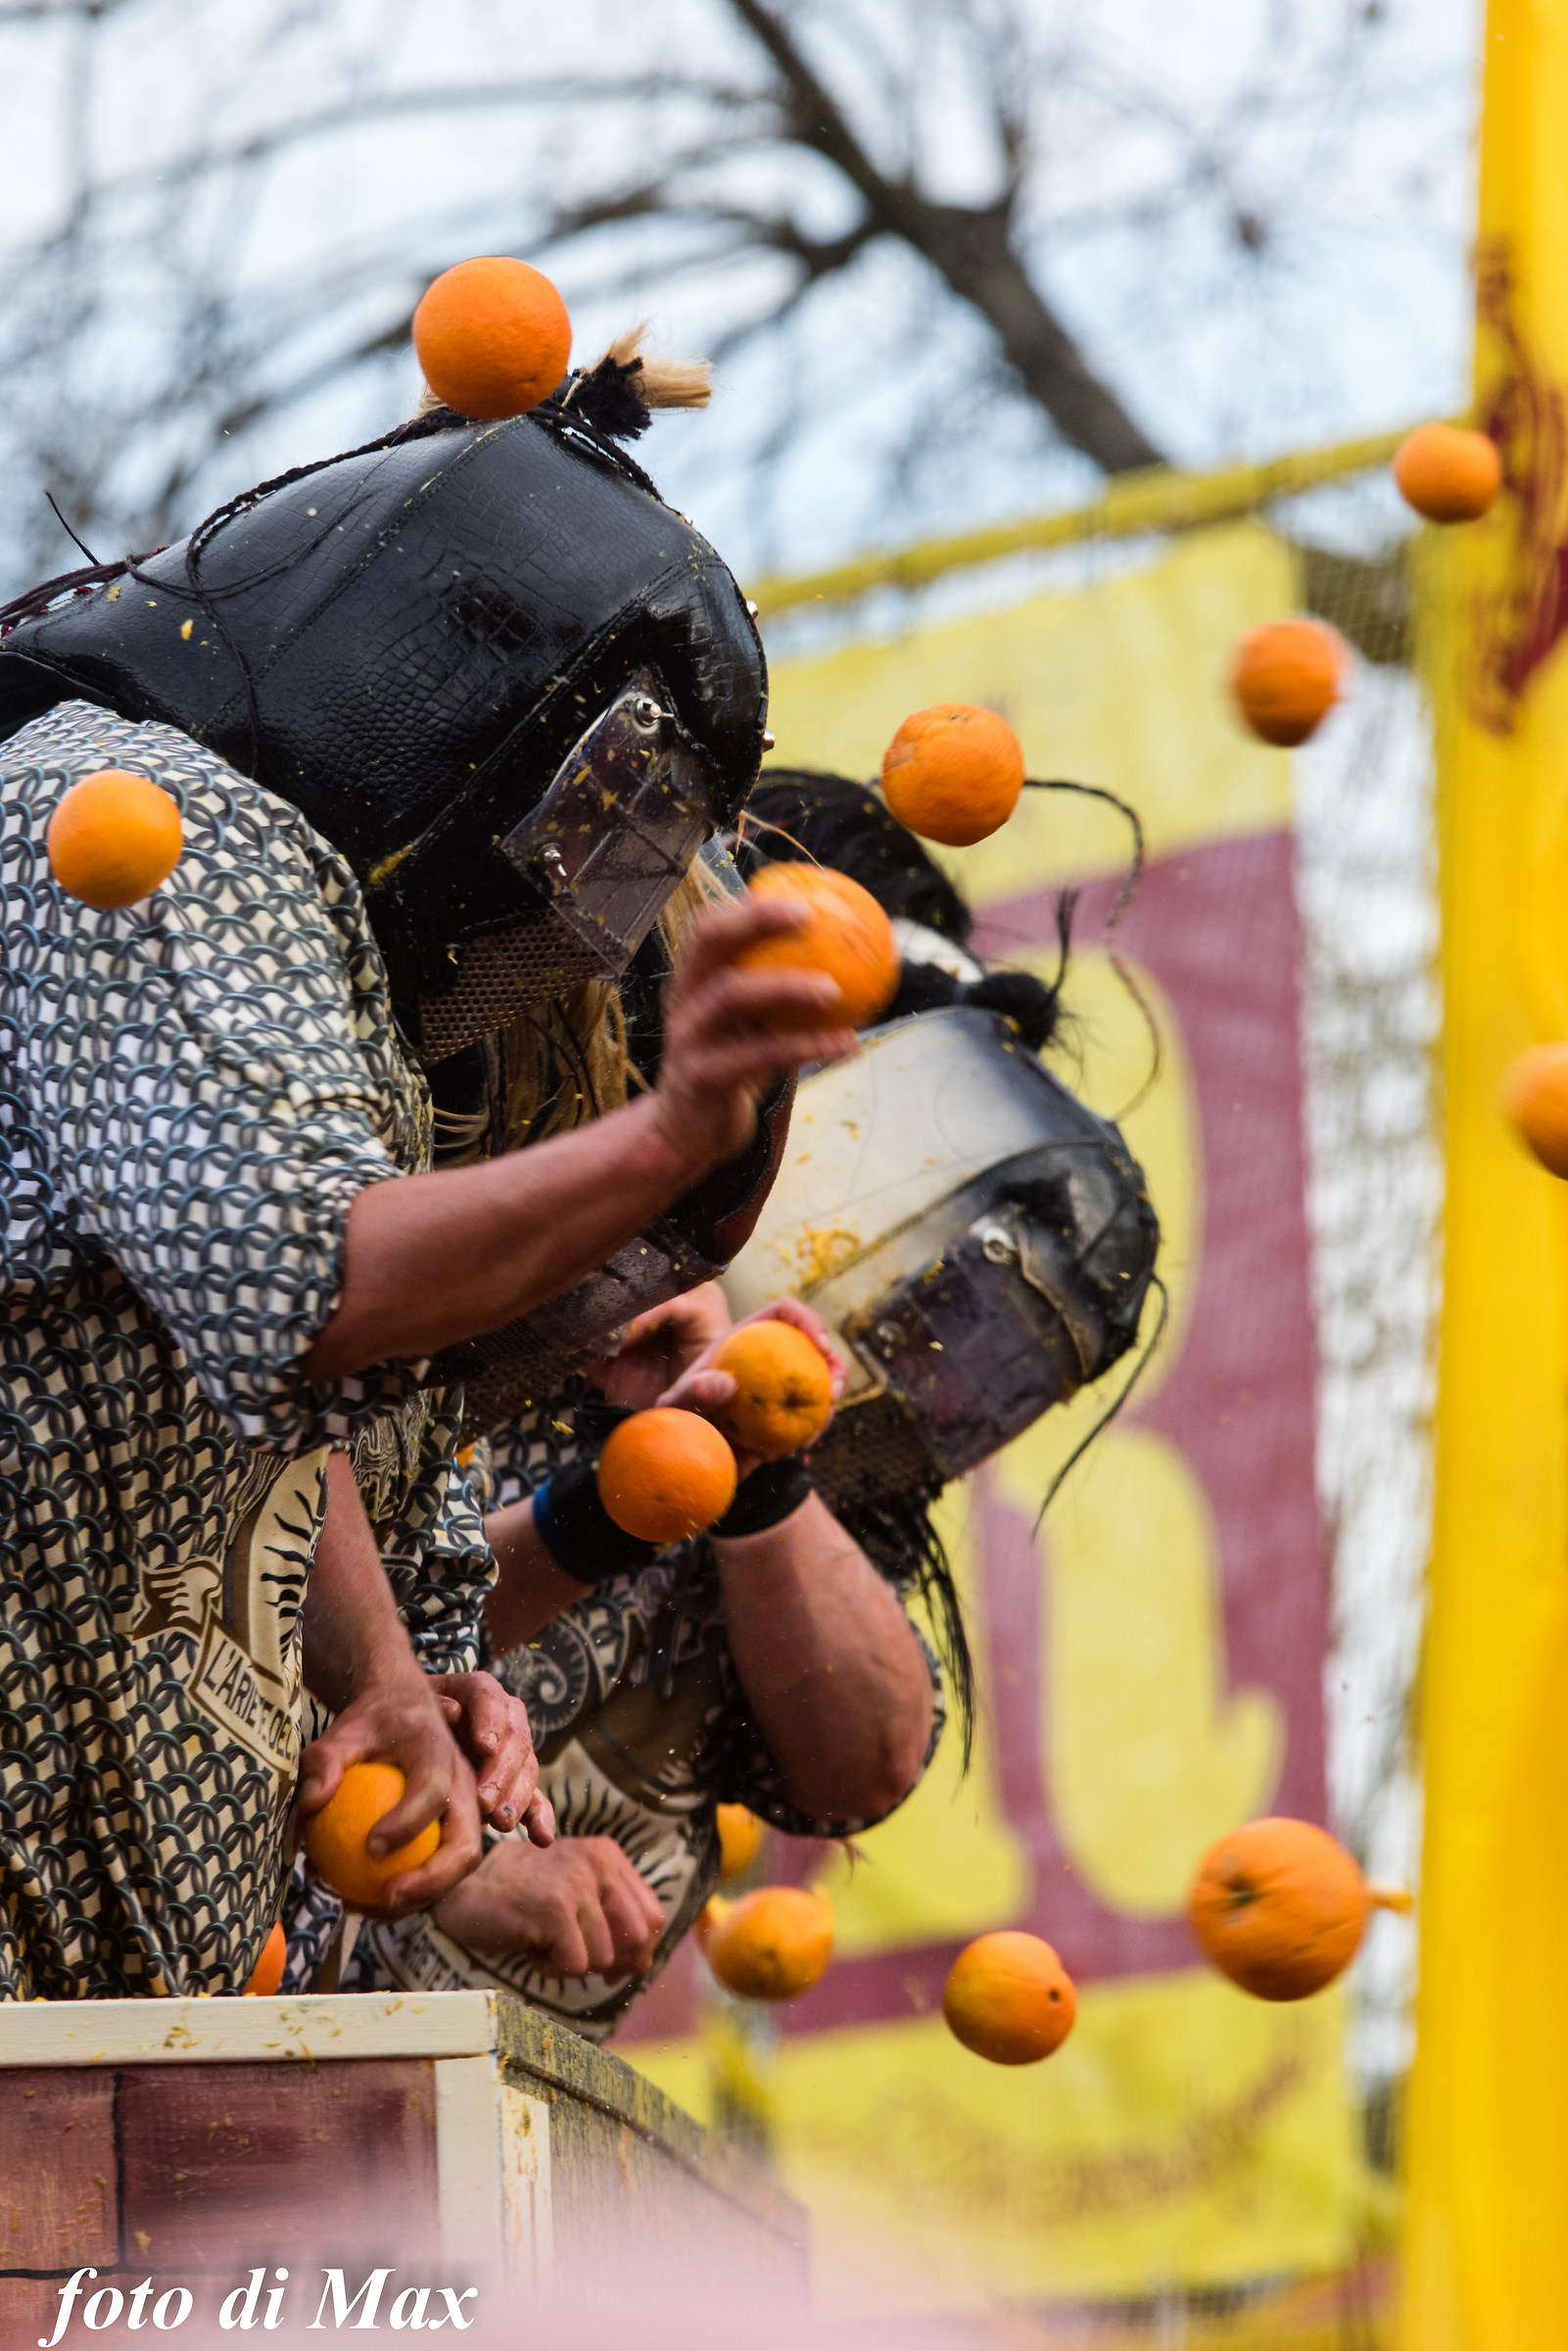 The Battle of the Oranges...